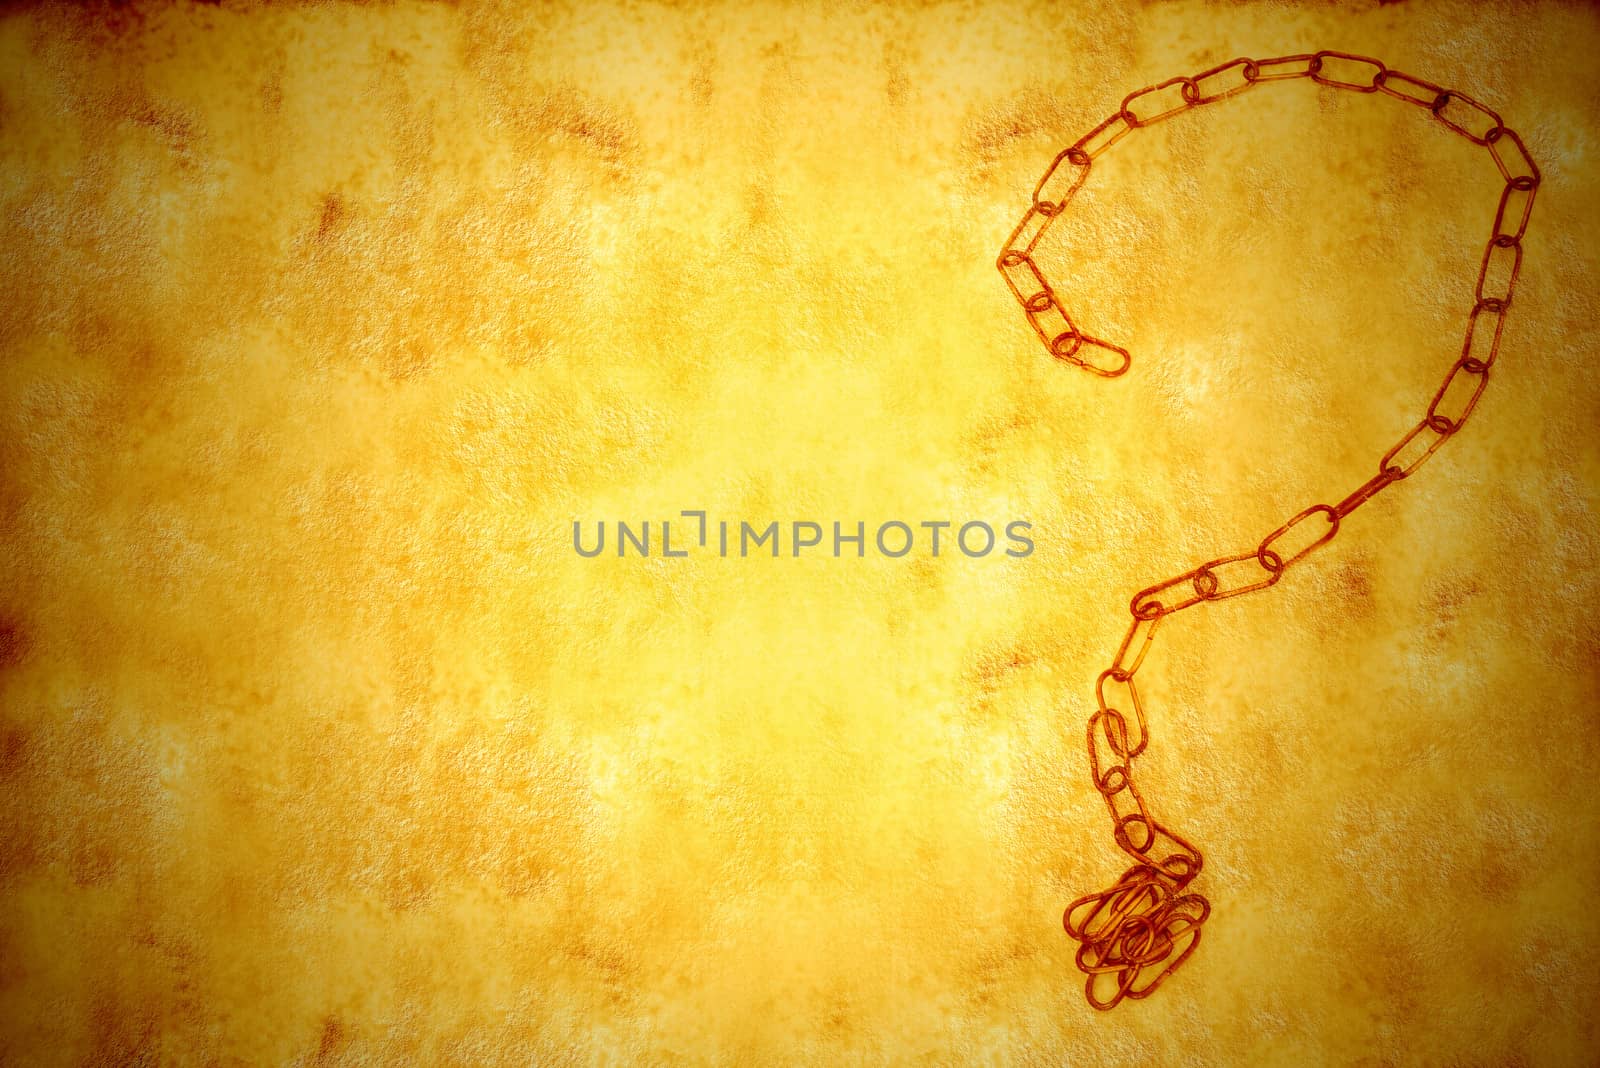 chain forms question mark copy space background by Carche